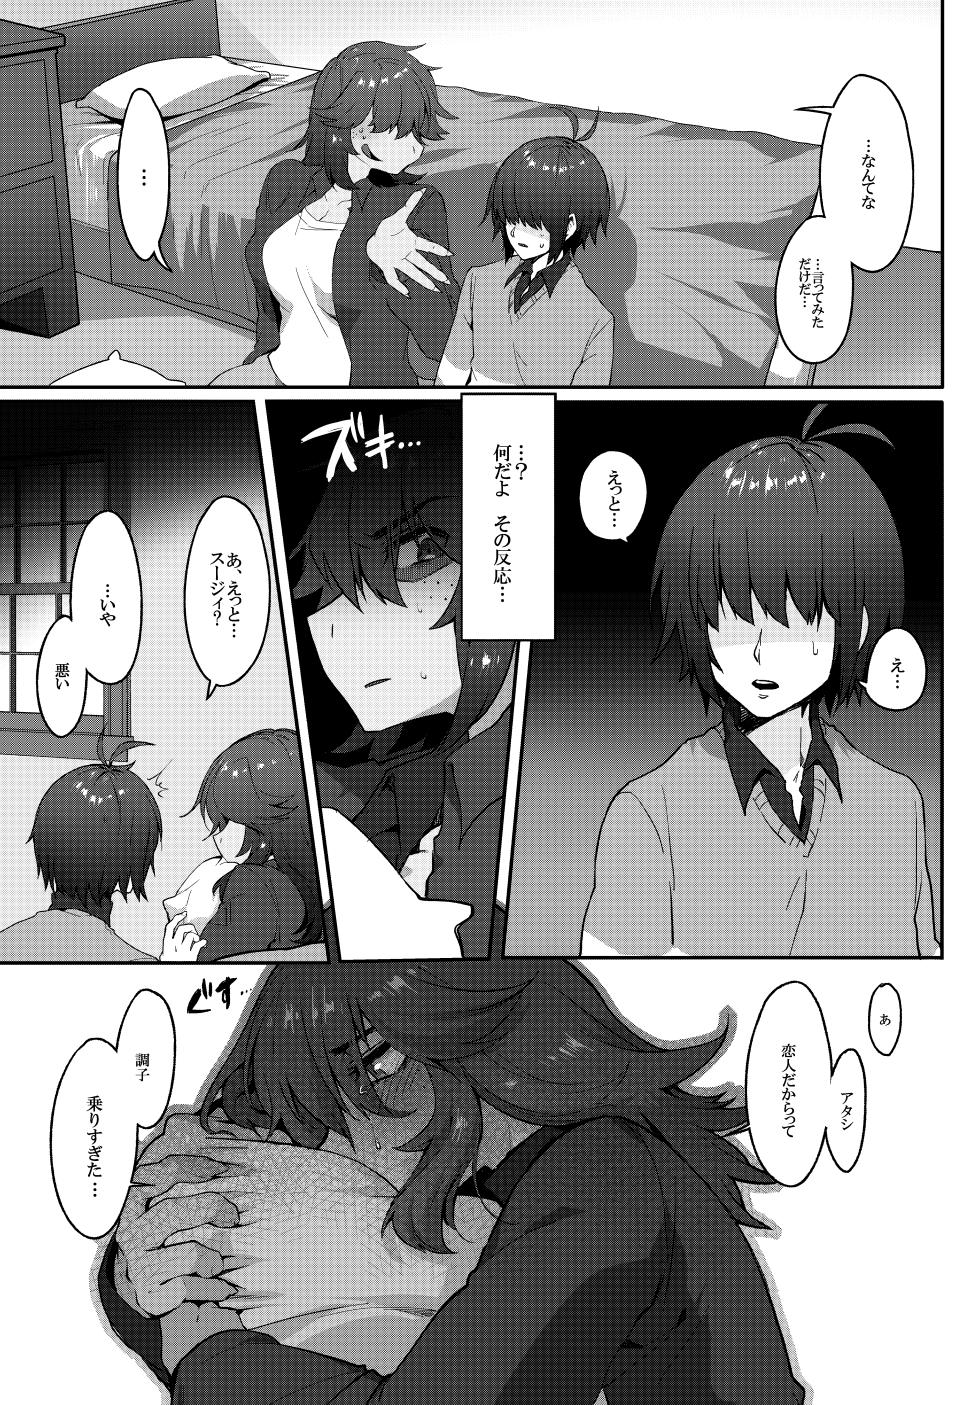 [Komugiko] Tell Me What You Love Me (Fly me to the moon) (Deltarune) [Japanese, English] - Page 9